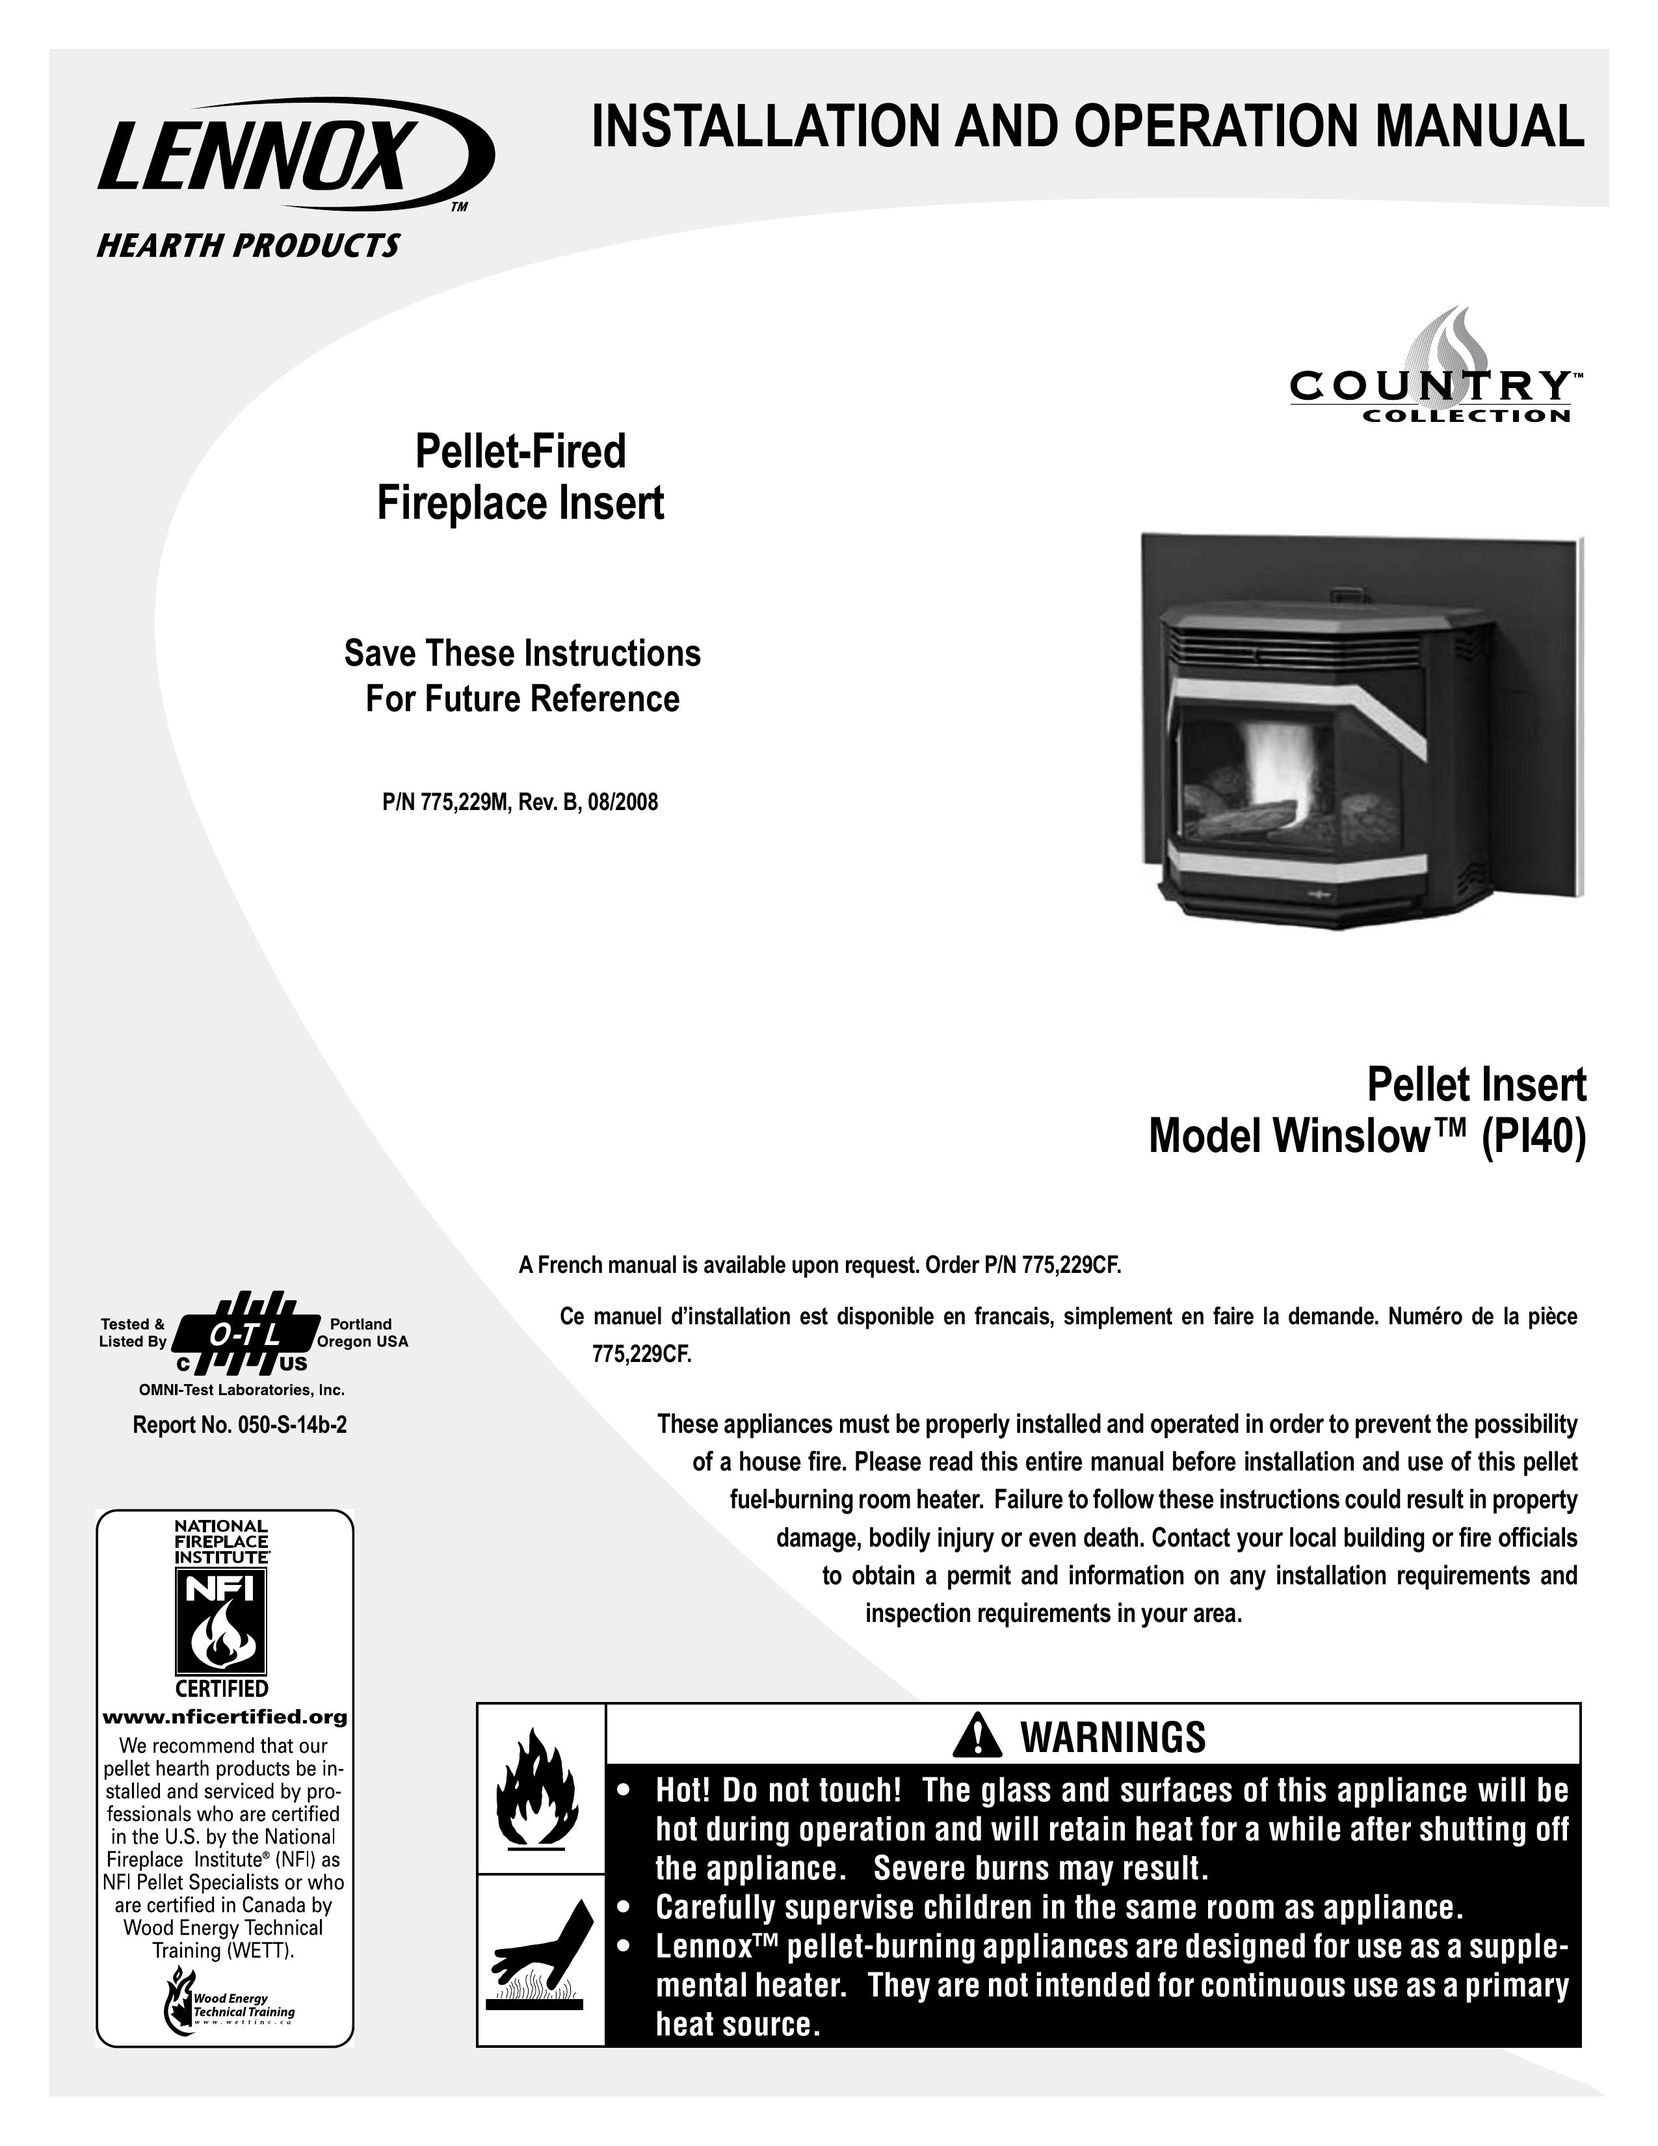 Maytag PI40 Indoor Fireplace User Manual